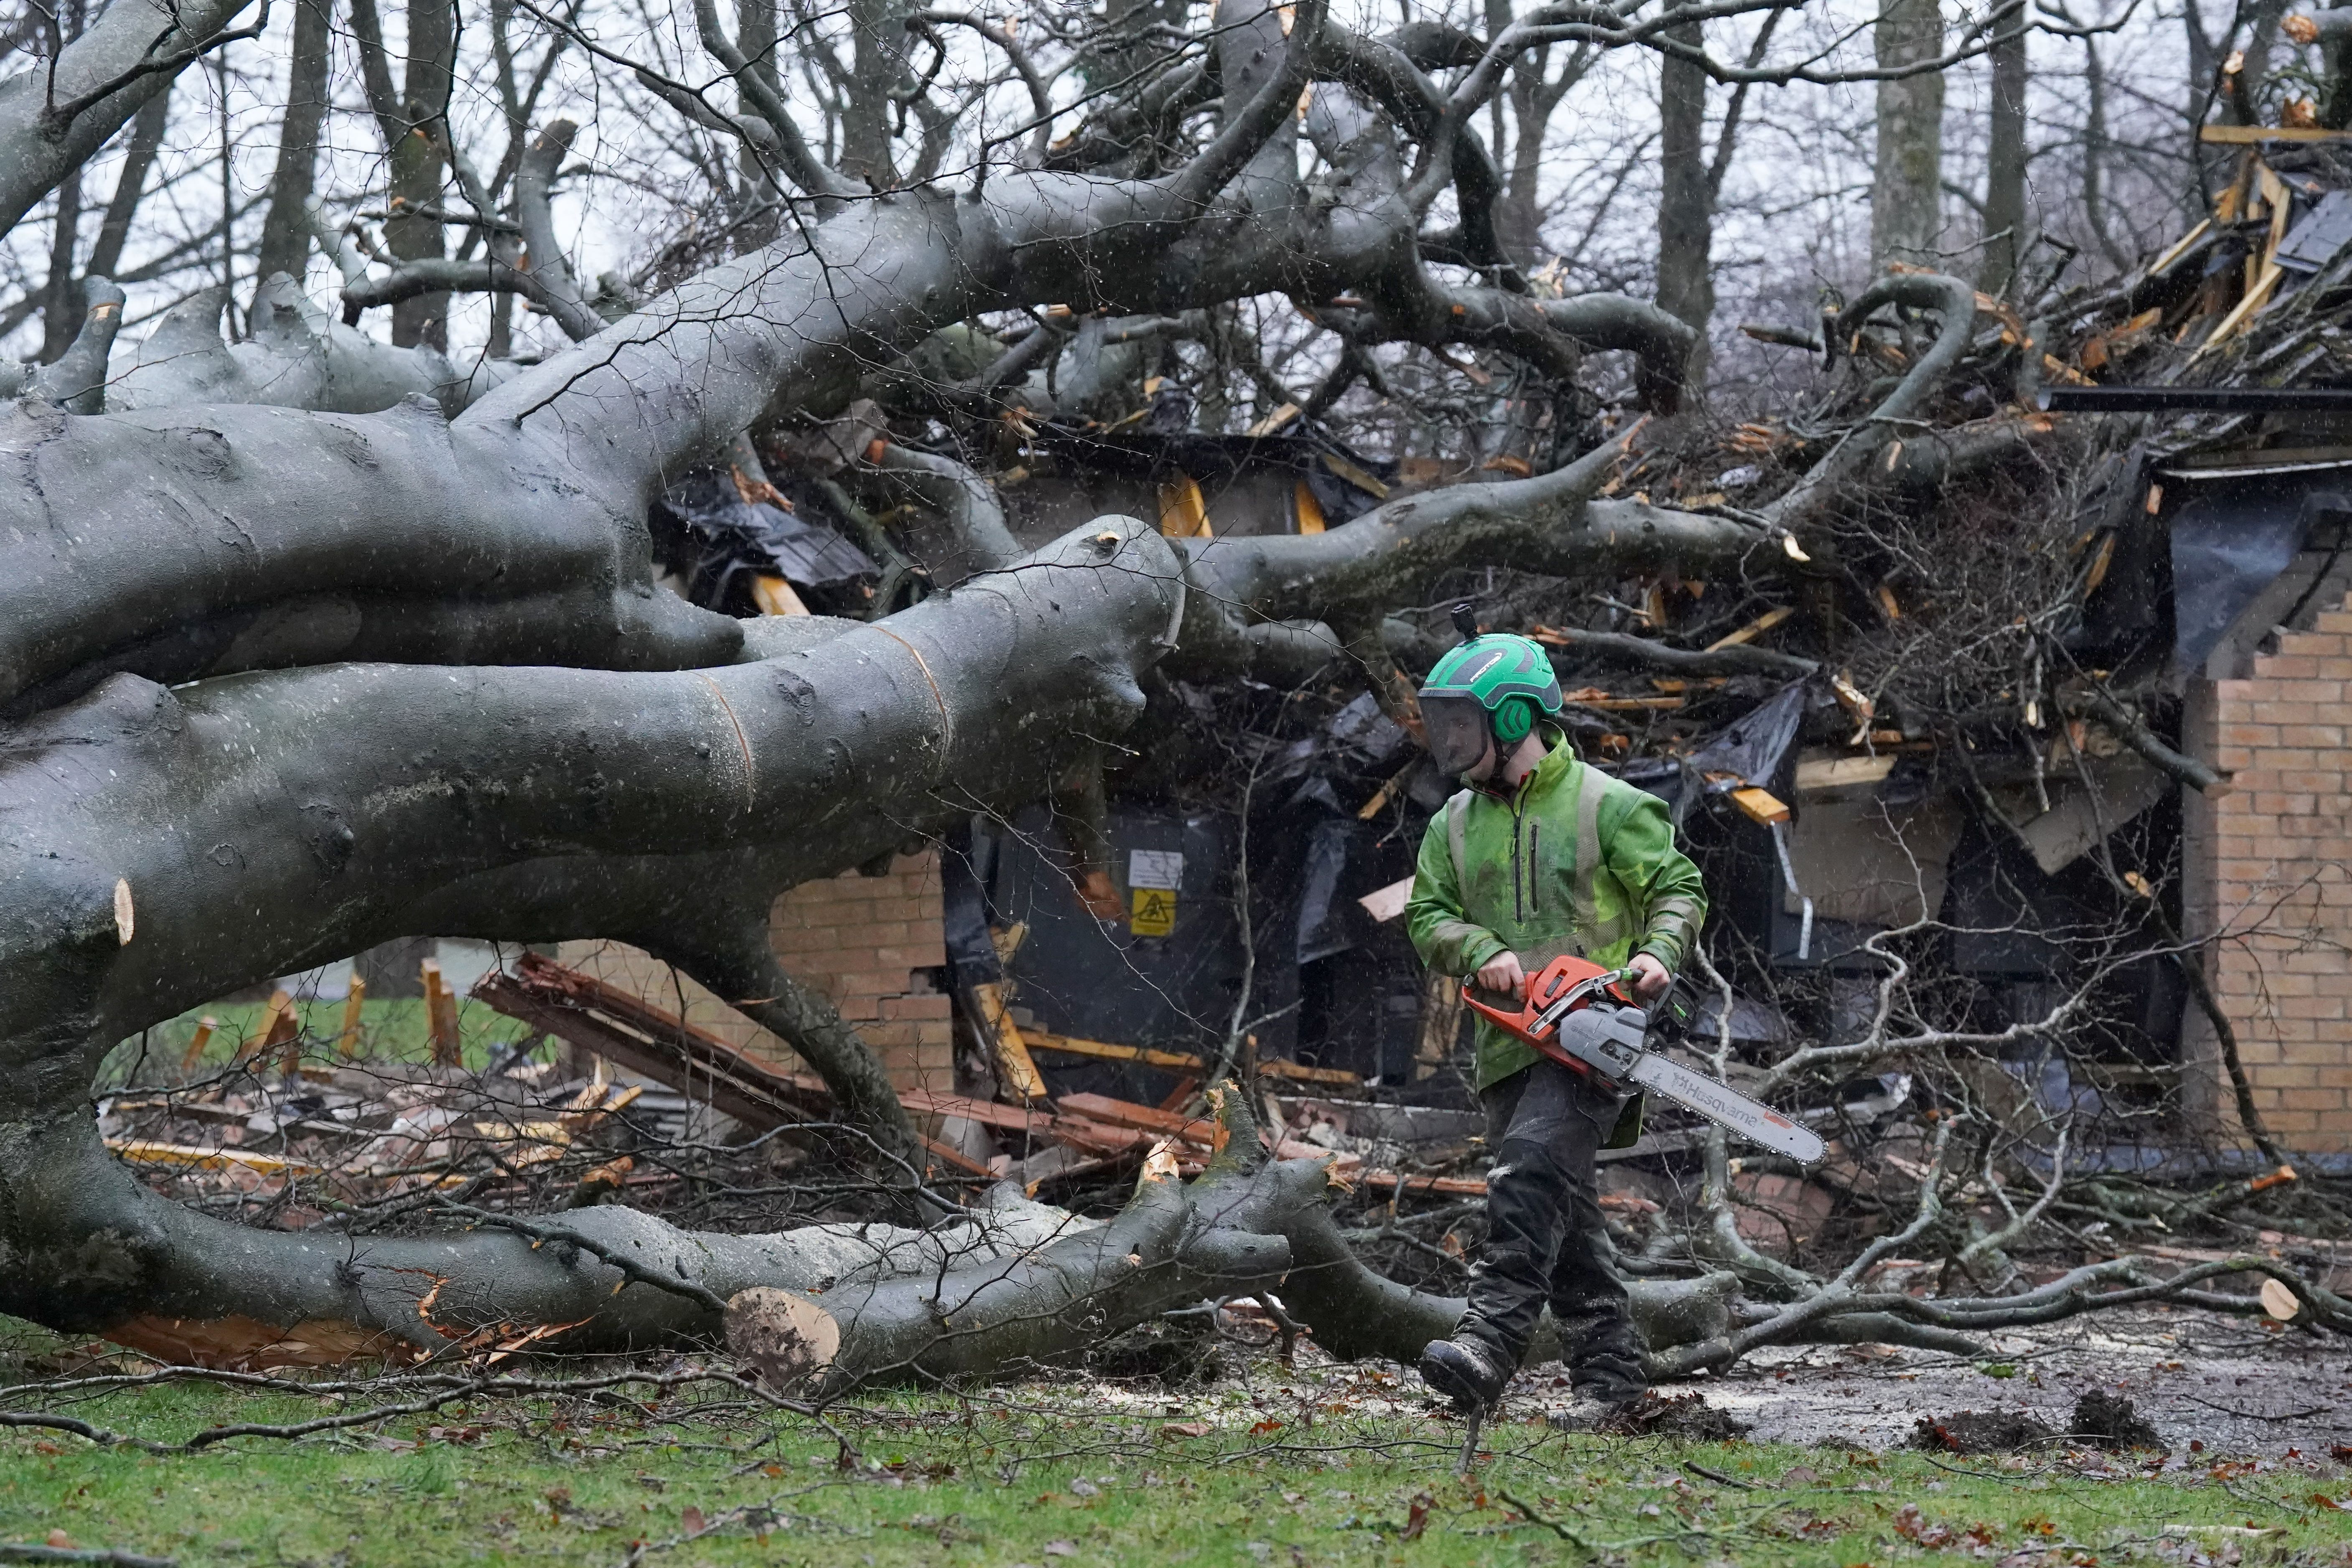 Workers remove a tree that fell on an electricity substation on the Kinnaird estate in Larbert during Storm Isha on Sunday (Andrew Milligan/PA)